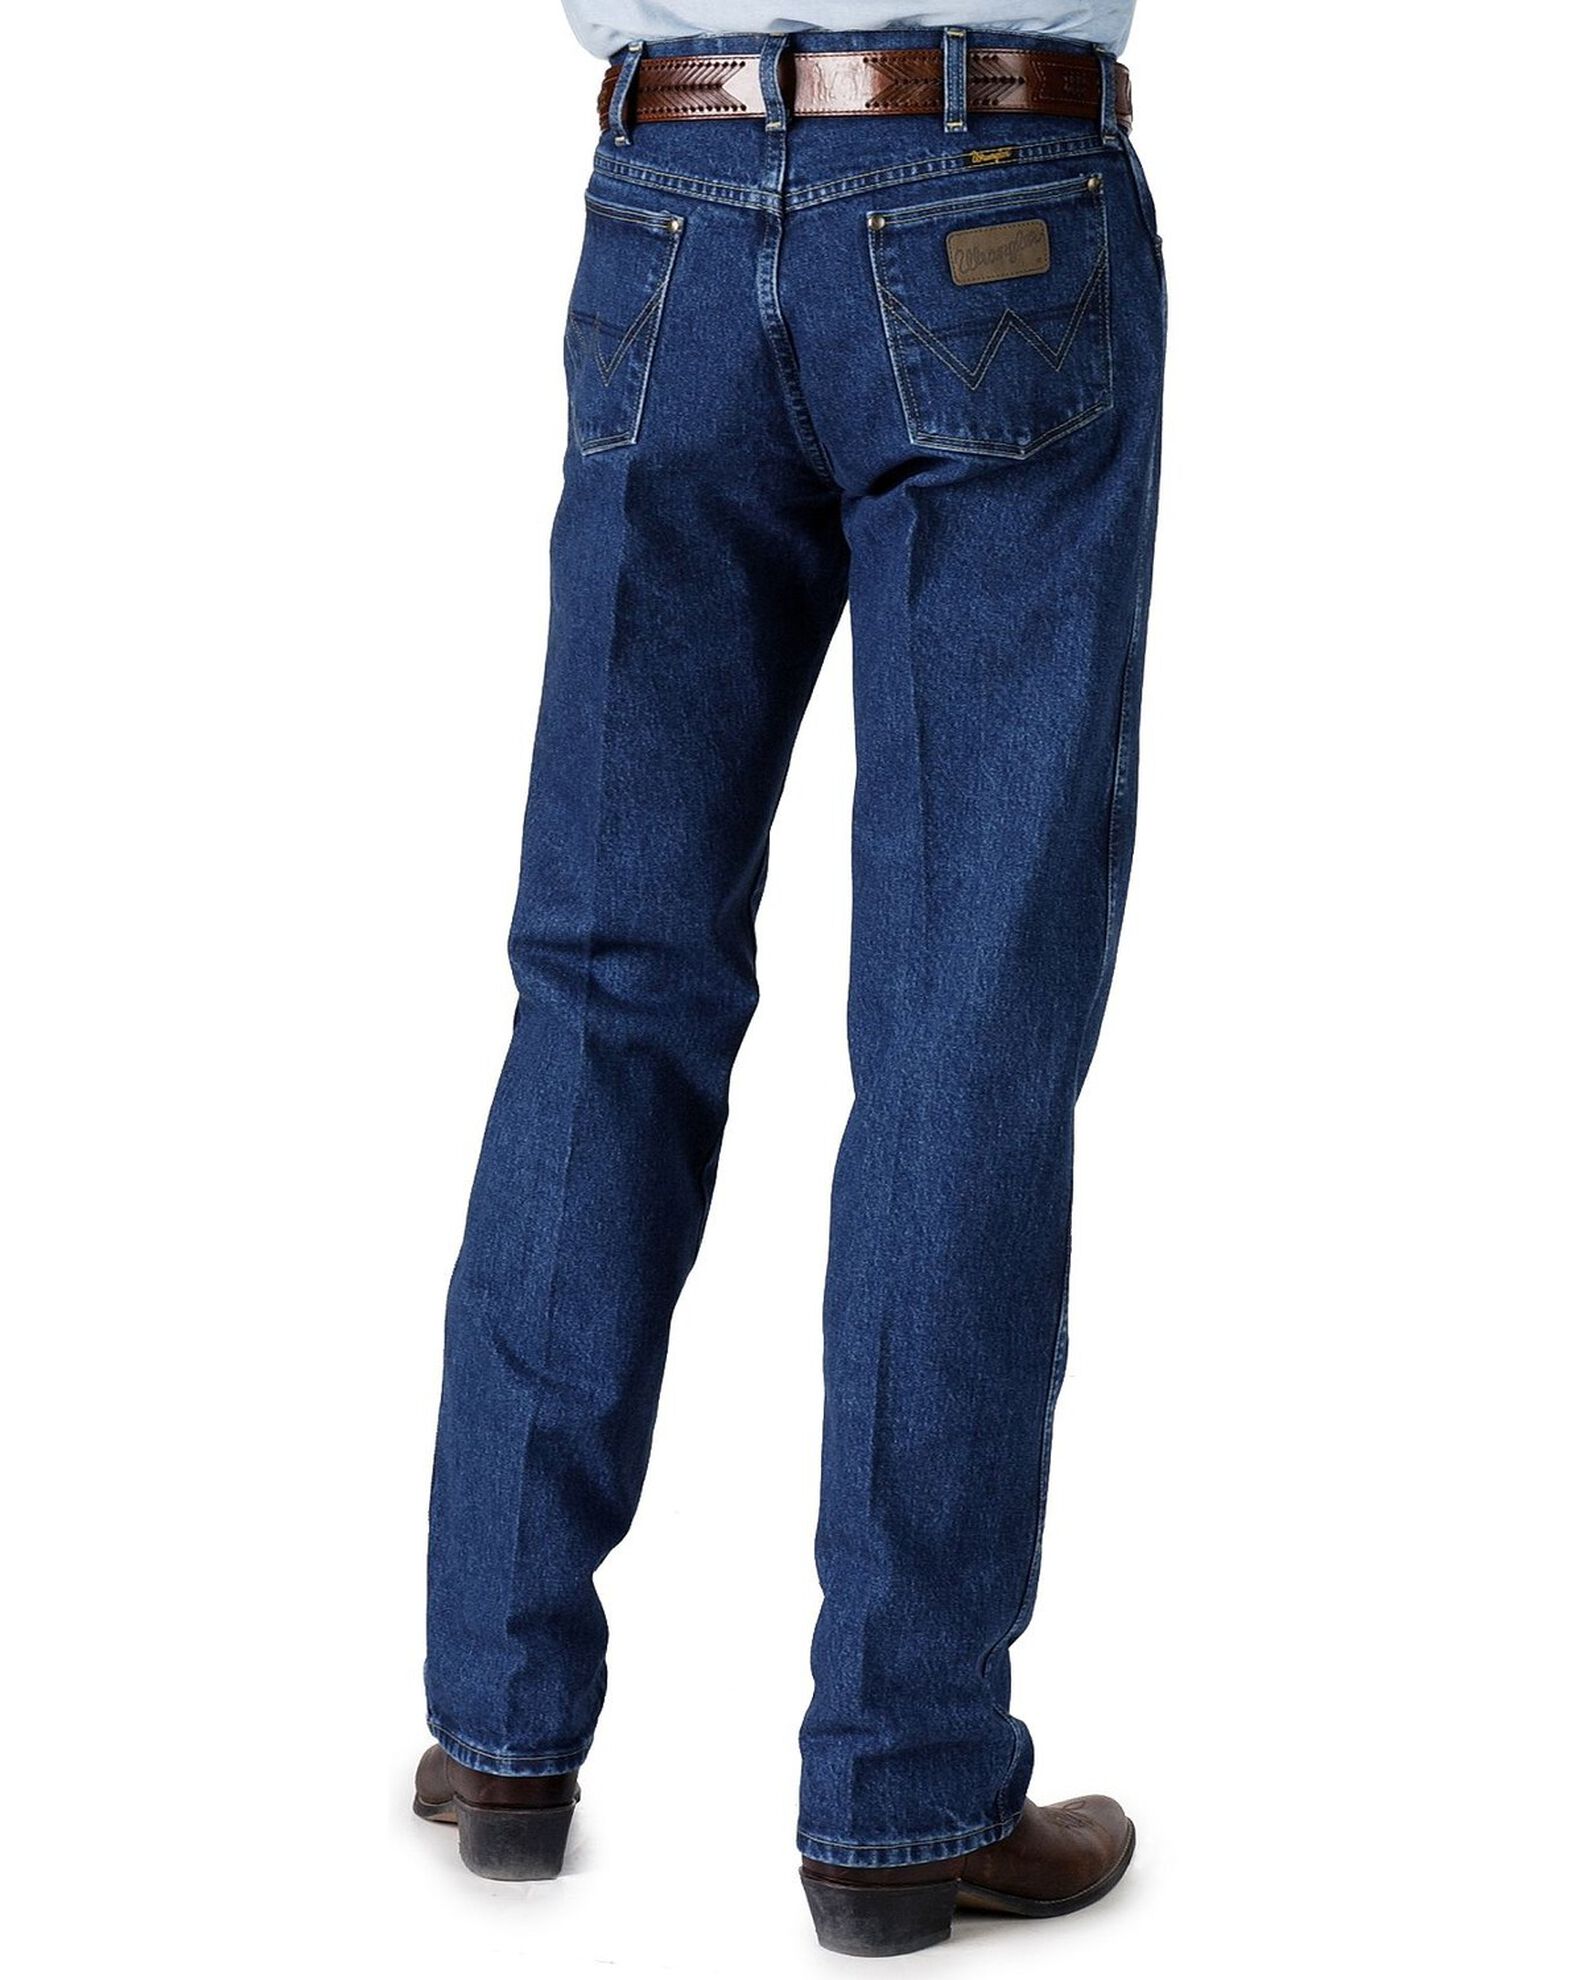 Product Name: Wrangler Jeans - 31MWZ George Strait Relaxed Fit